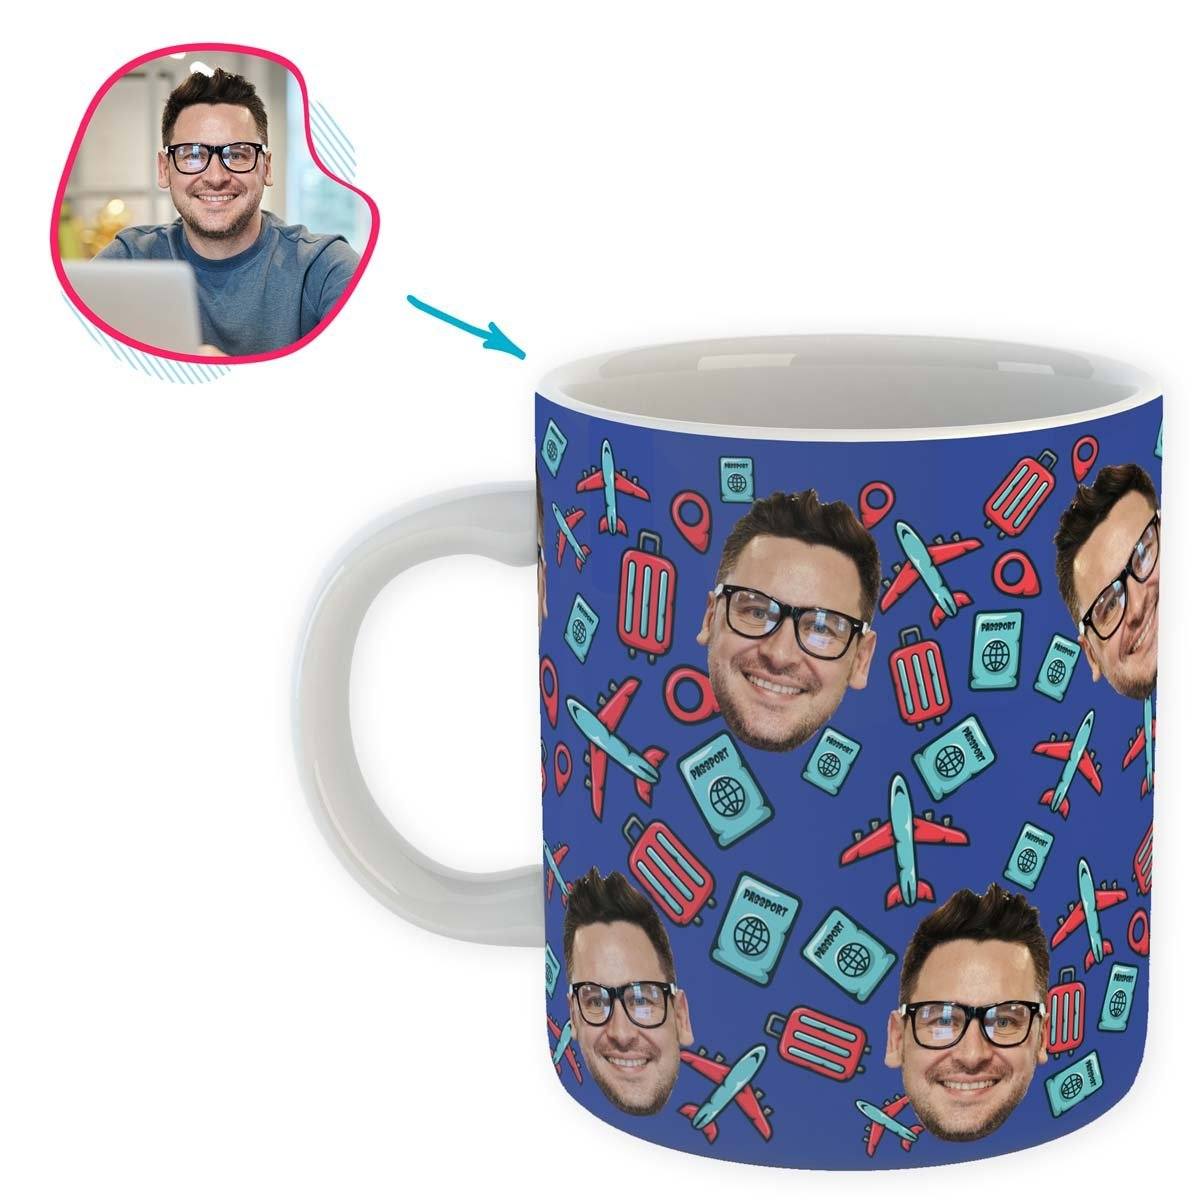 darkblue Traveler mug personalized with photo of face printed on it